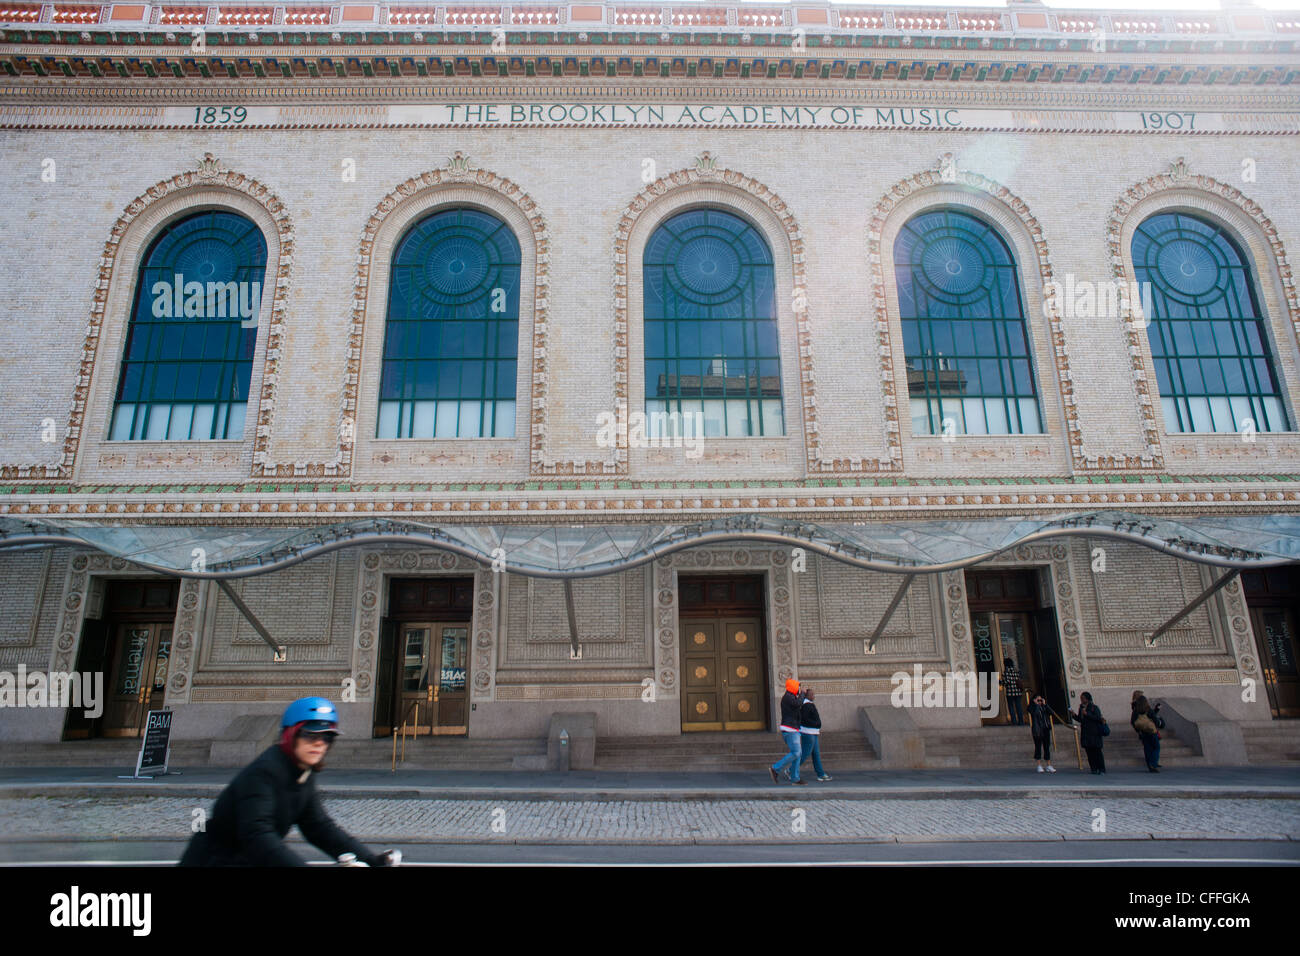 The Brooklyn Academy of Music is seen in Brooklyn in New York on Saturday, March 10, 2012. (© Richard B. Levine) Stock Photo